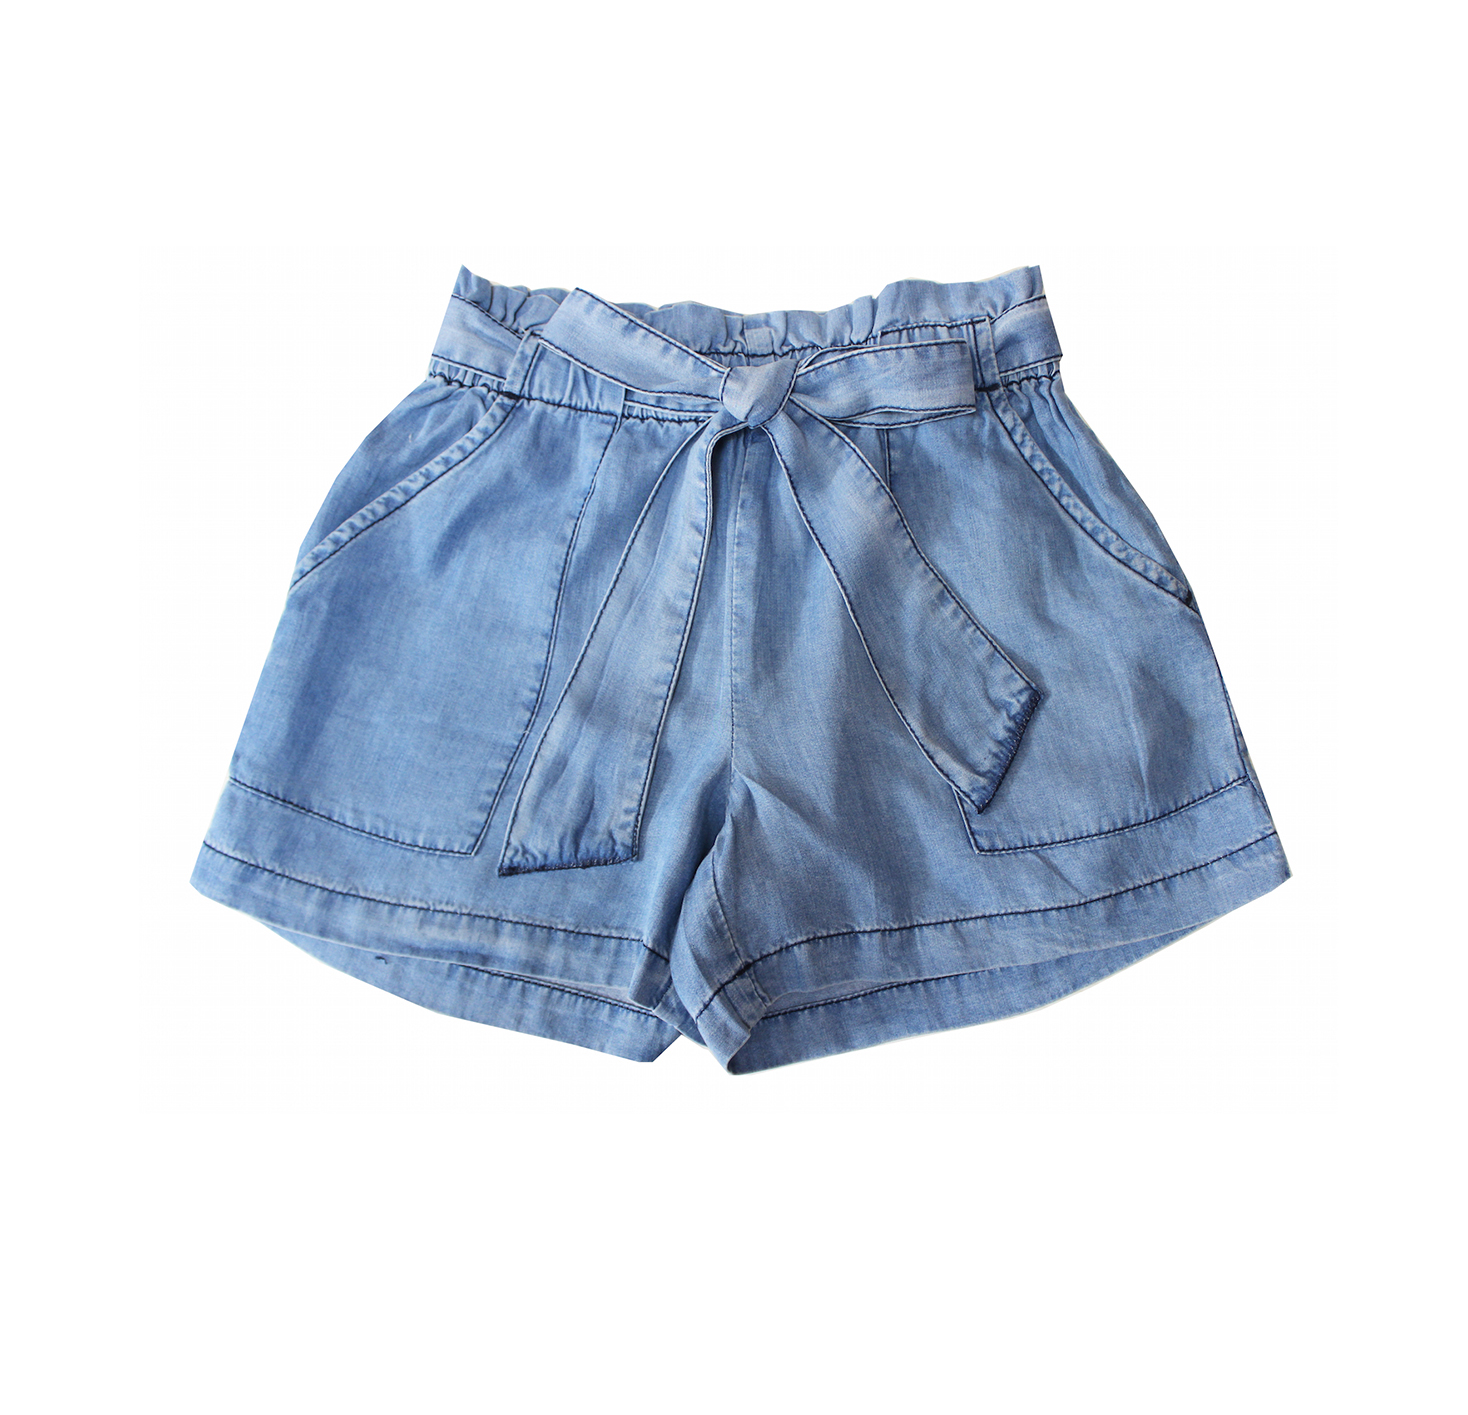 tie up jean shorts